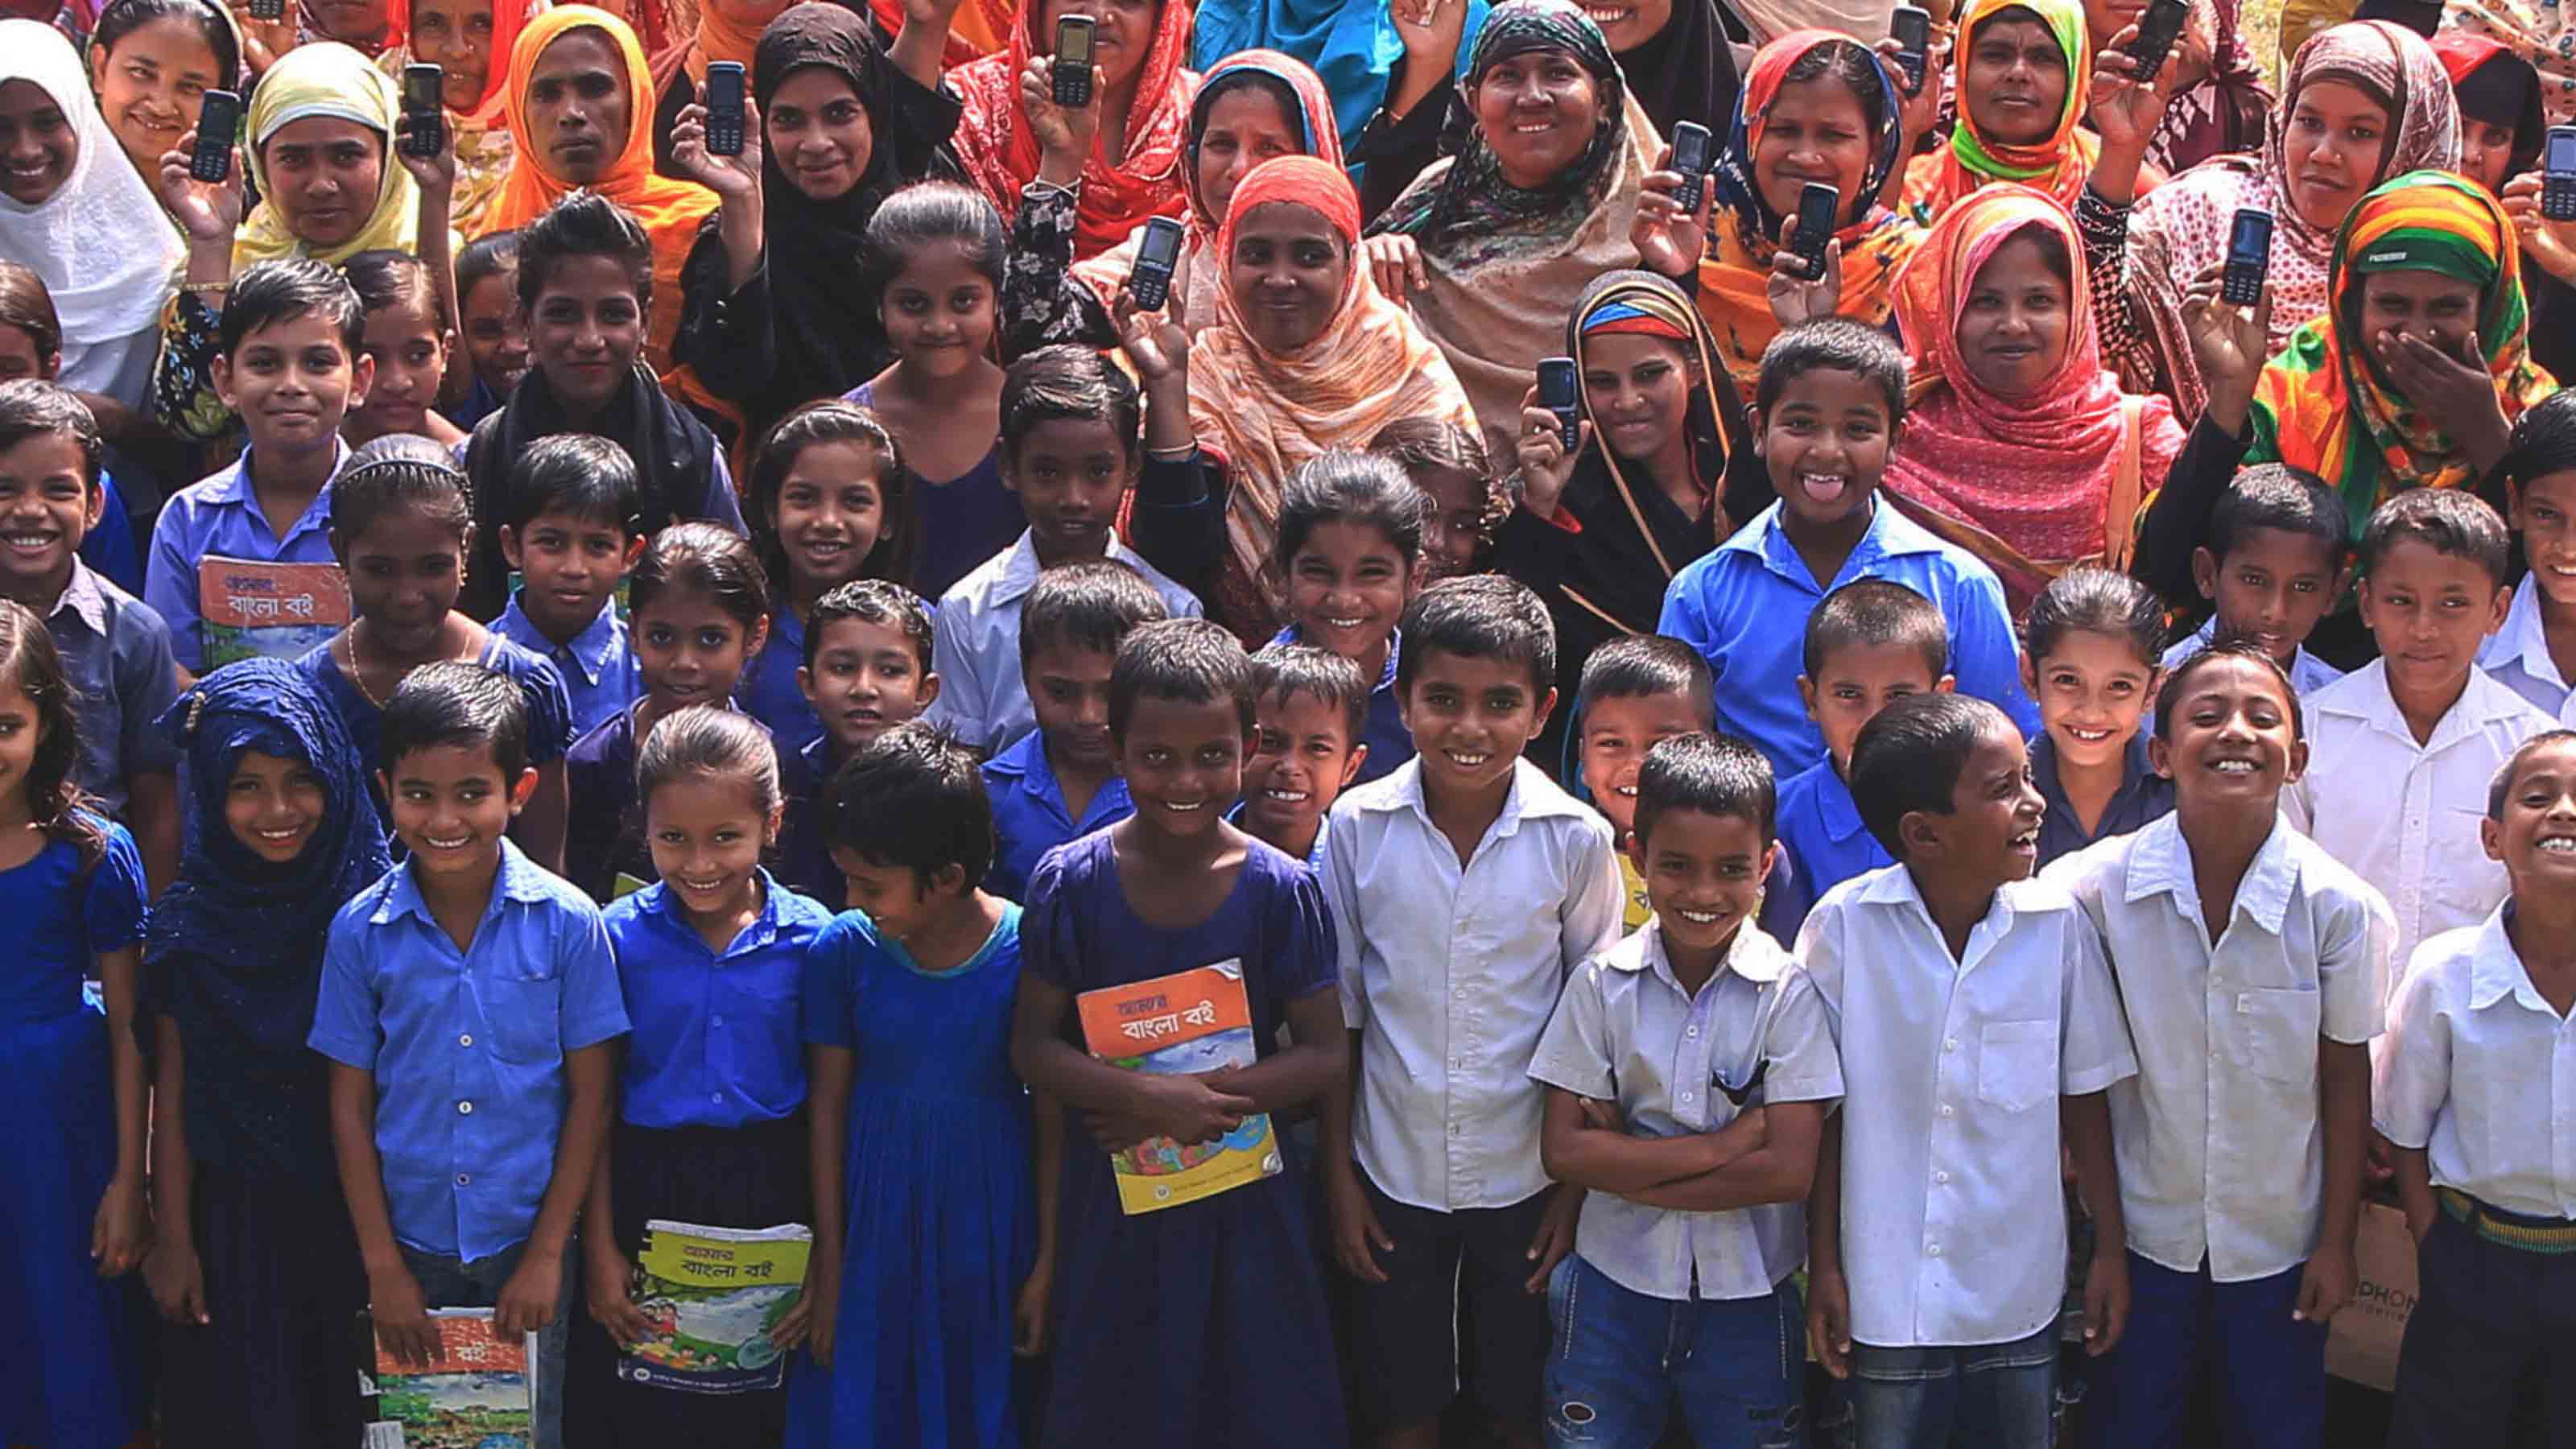 Group photo with children from Bangladesh